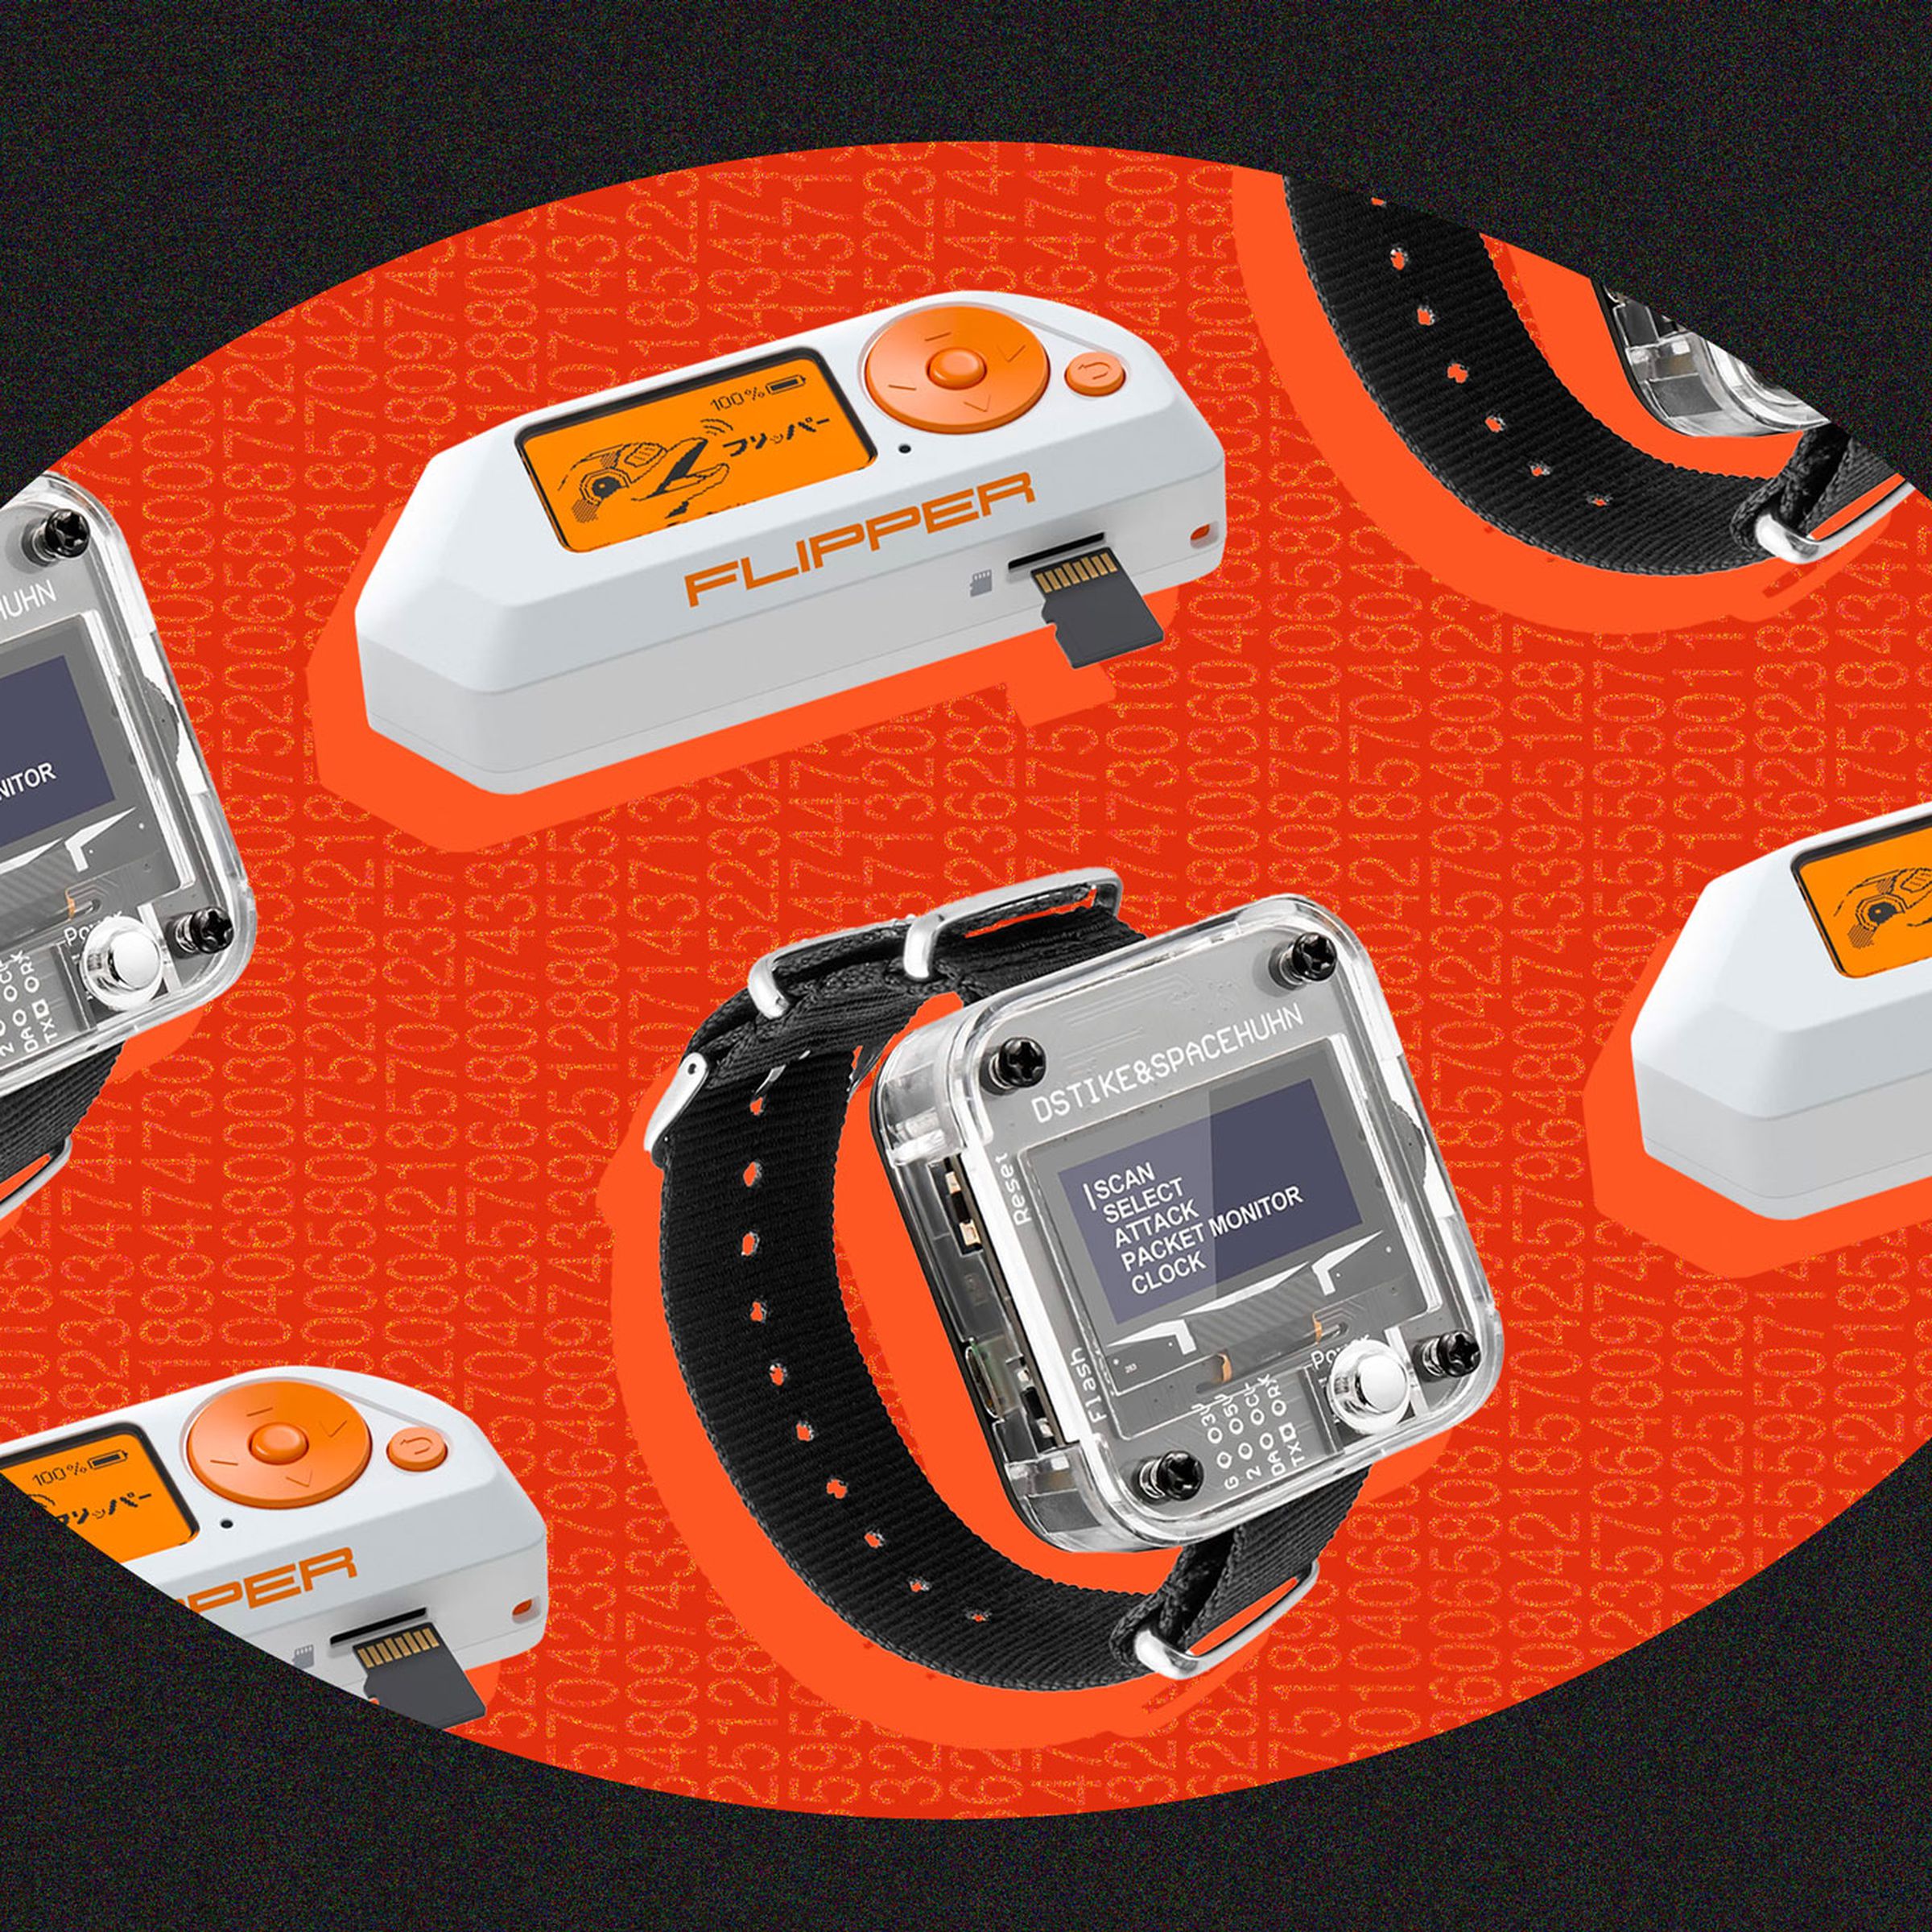 An eye-shaped opening reveals a Flipper Mini and open-hardware watch, set against an orange background.